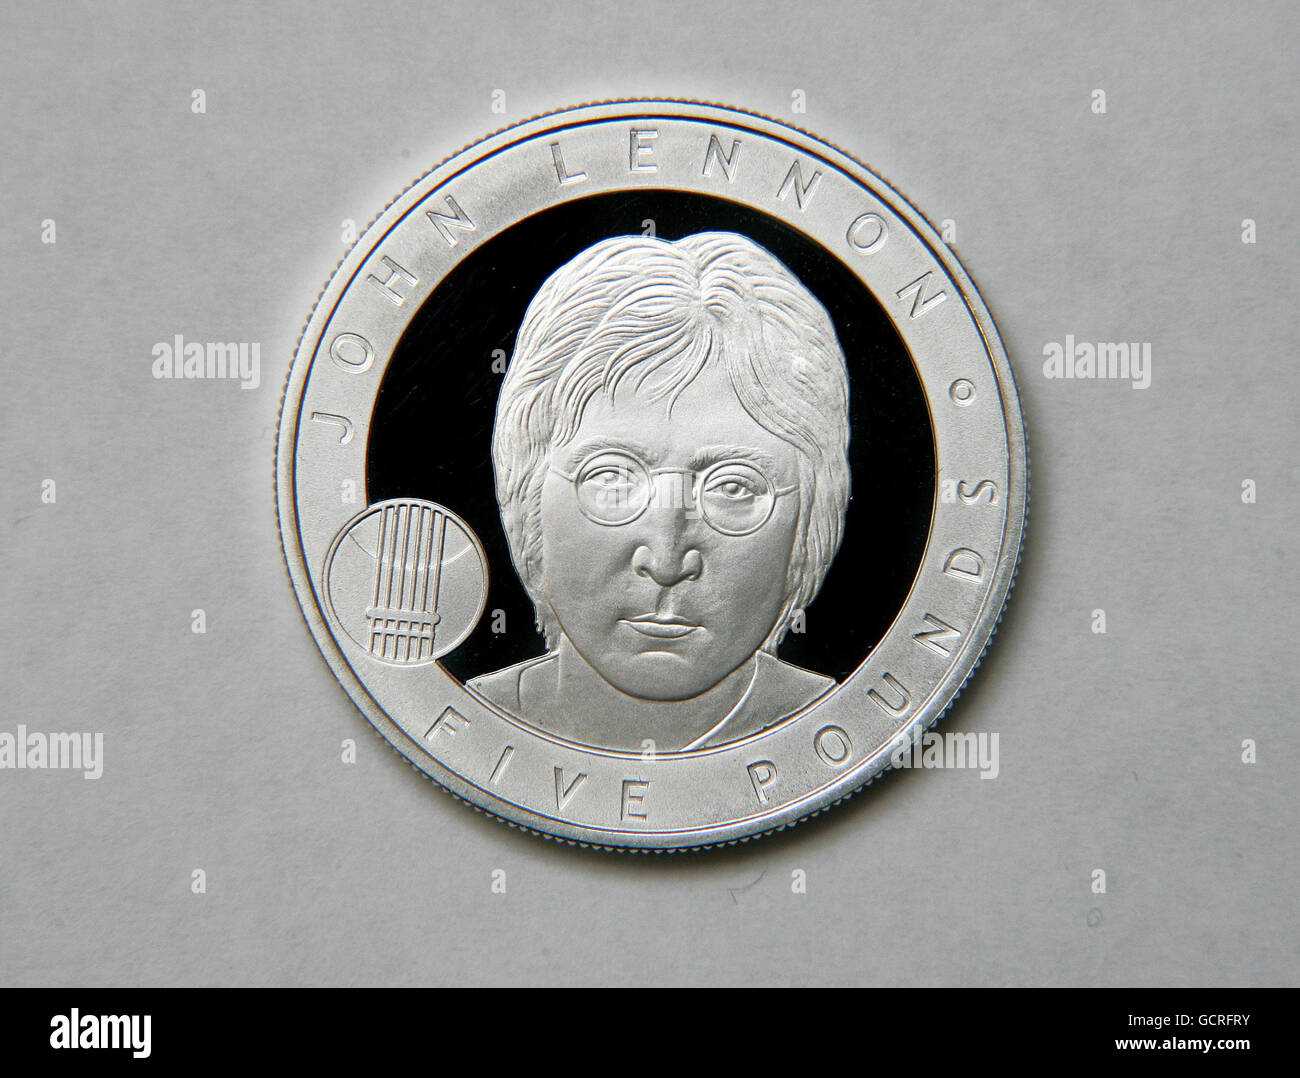 The Royal Mint's John Lennon 5 coin, which goes on sale today, after the former Beatle won a public vote to be the next Great Briton' to feature on a coin. Stock Photo